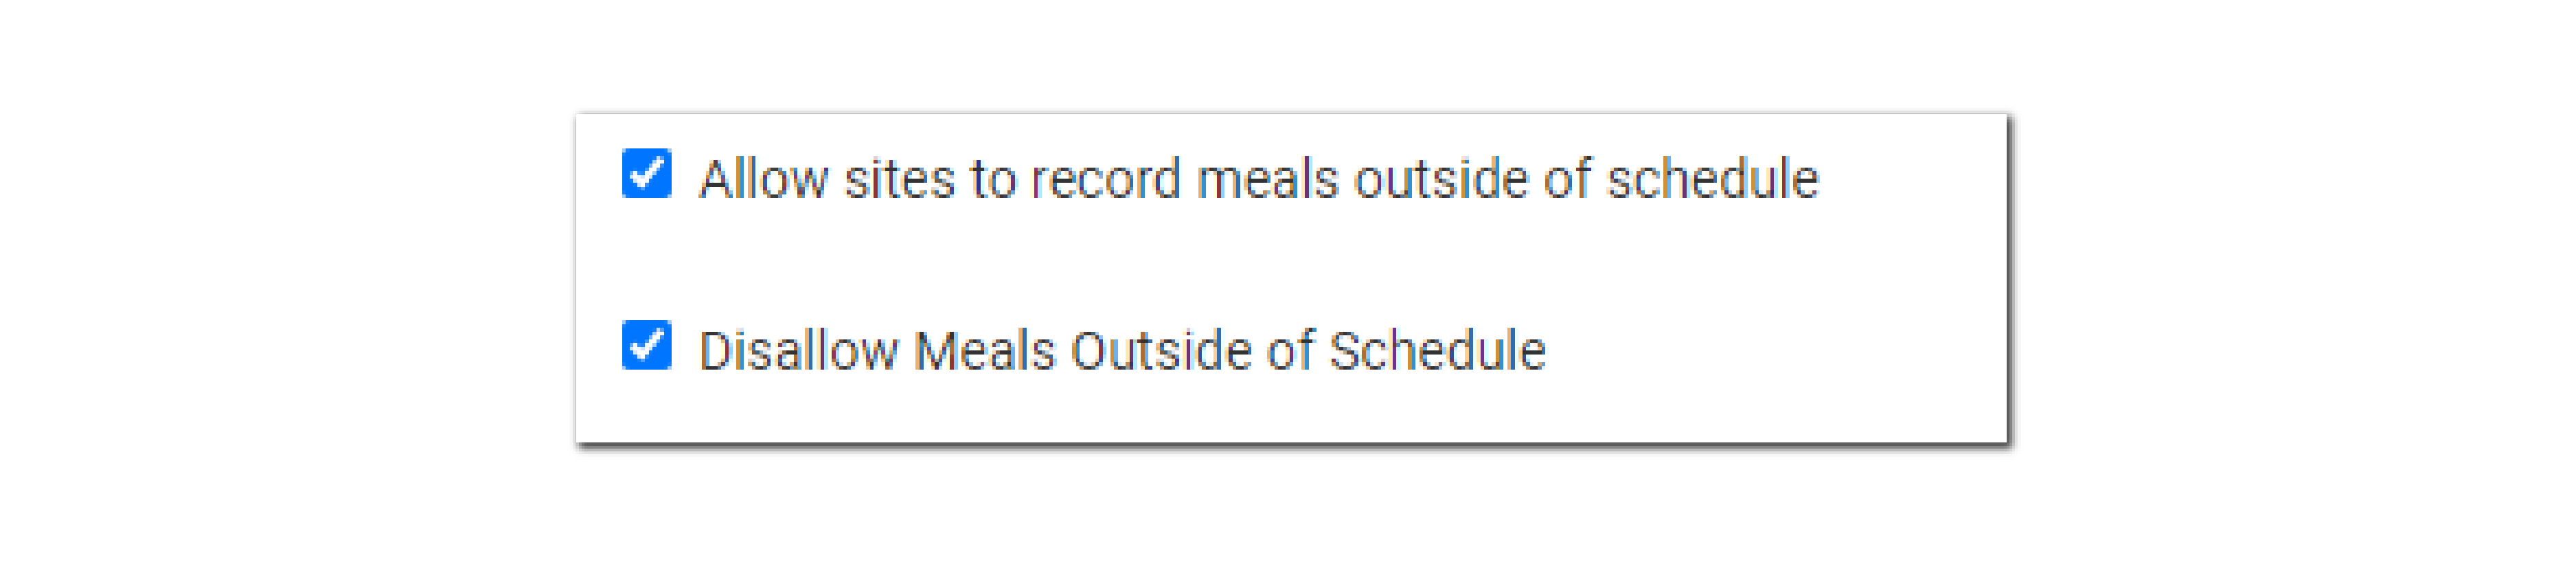 Restrict Sites from Claiming Meals Outside of Participant Schedules